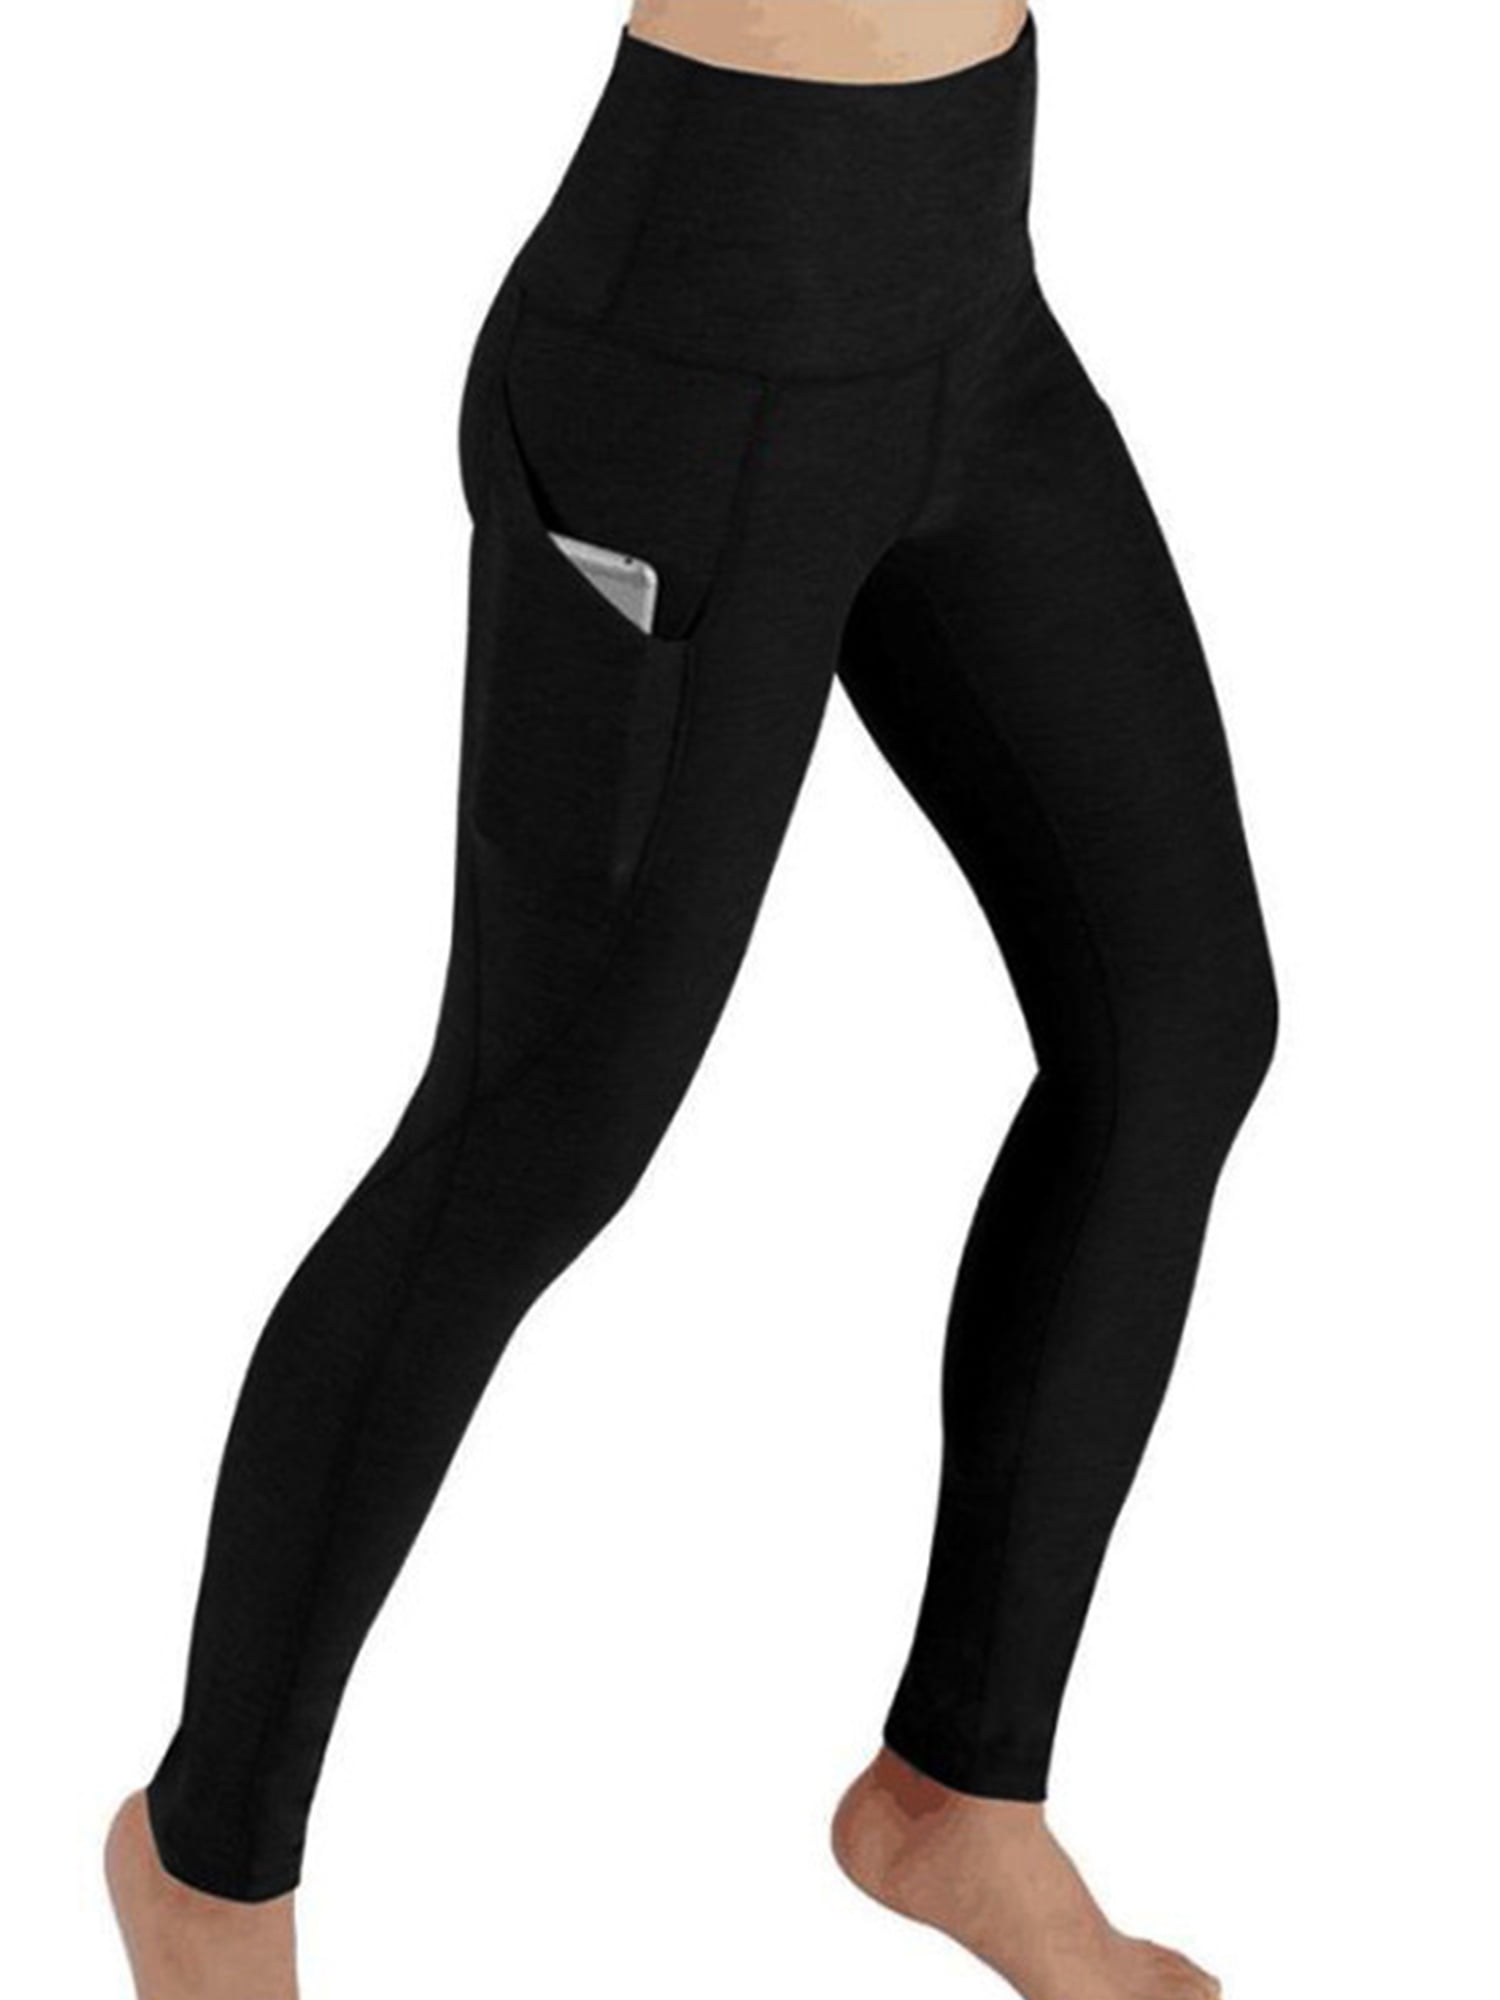 Womens Sport Compression Fitness Leggings Running Gym Yoga Pants Stretch Trouser 